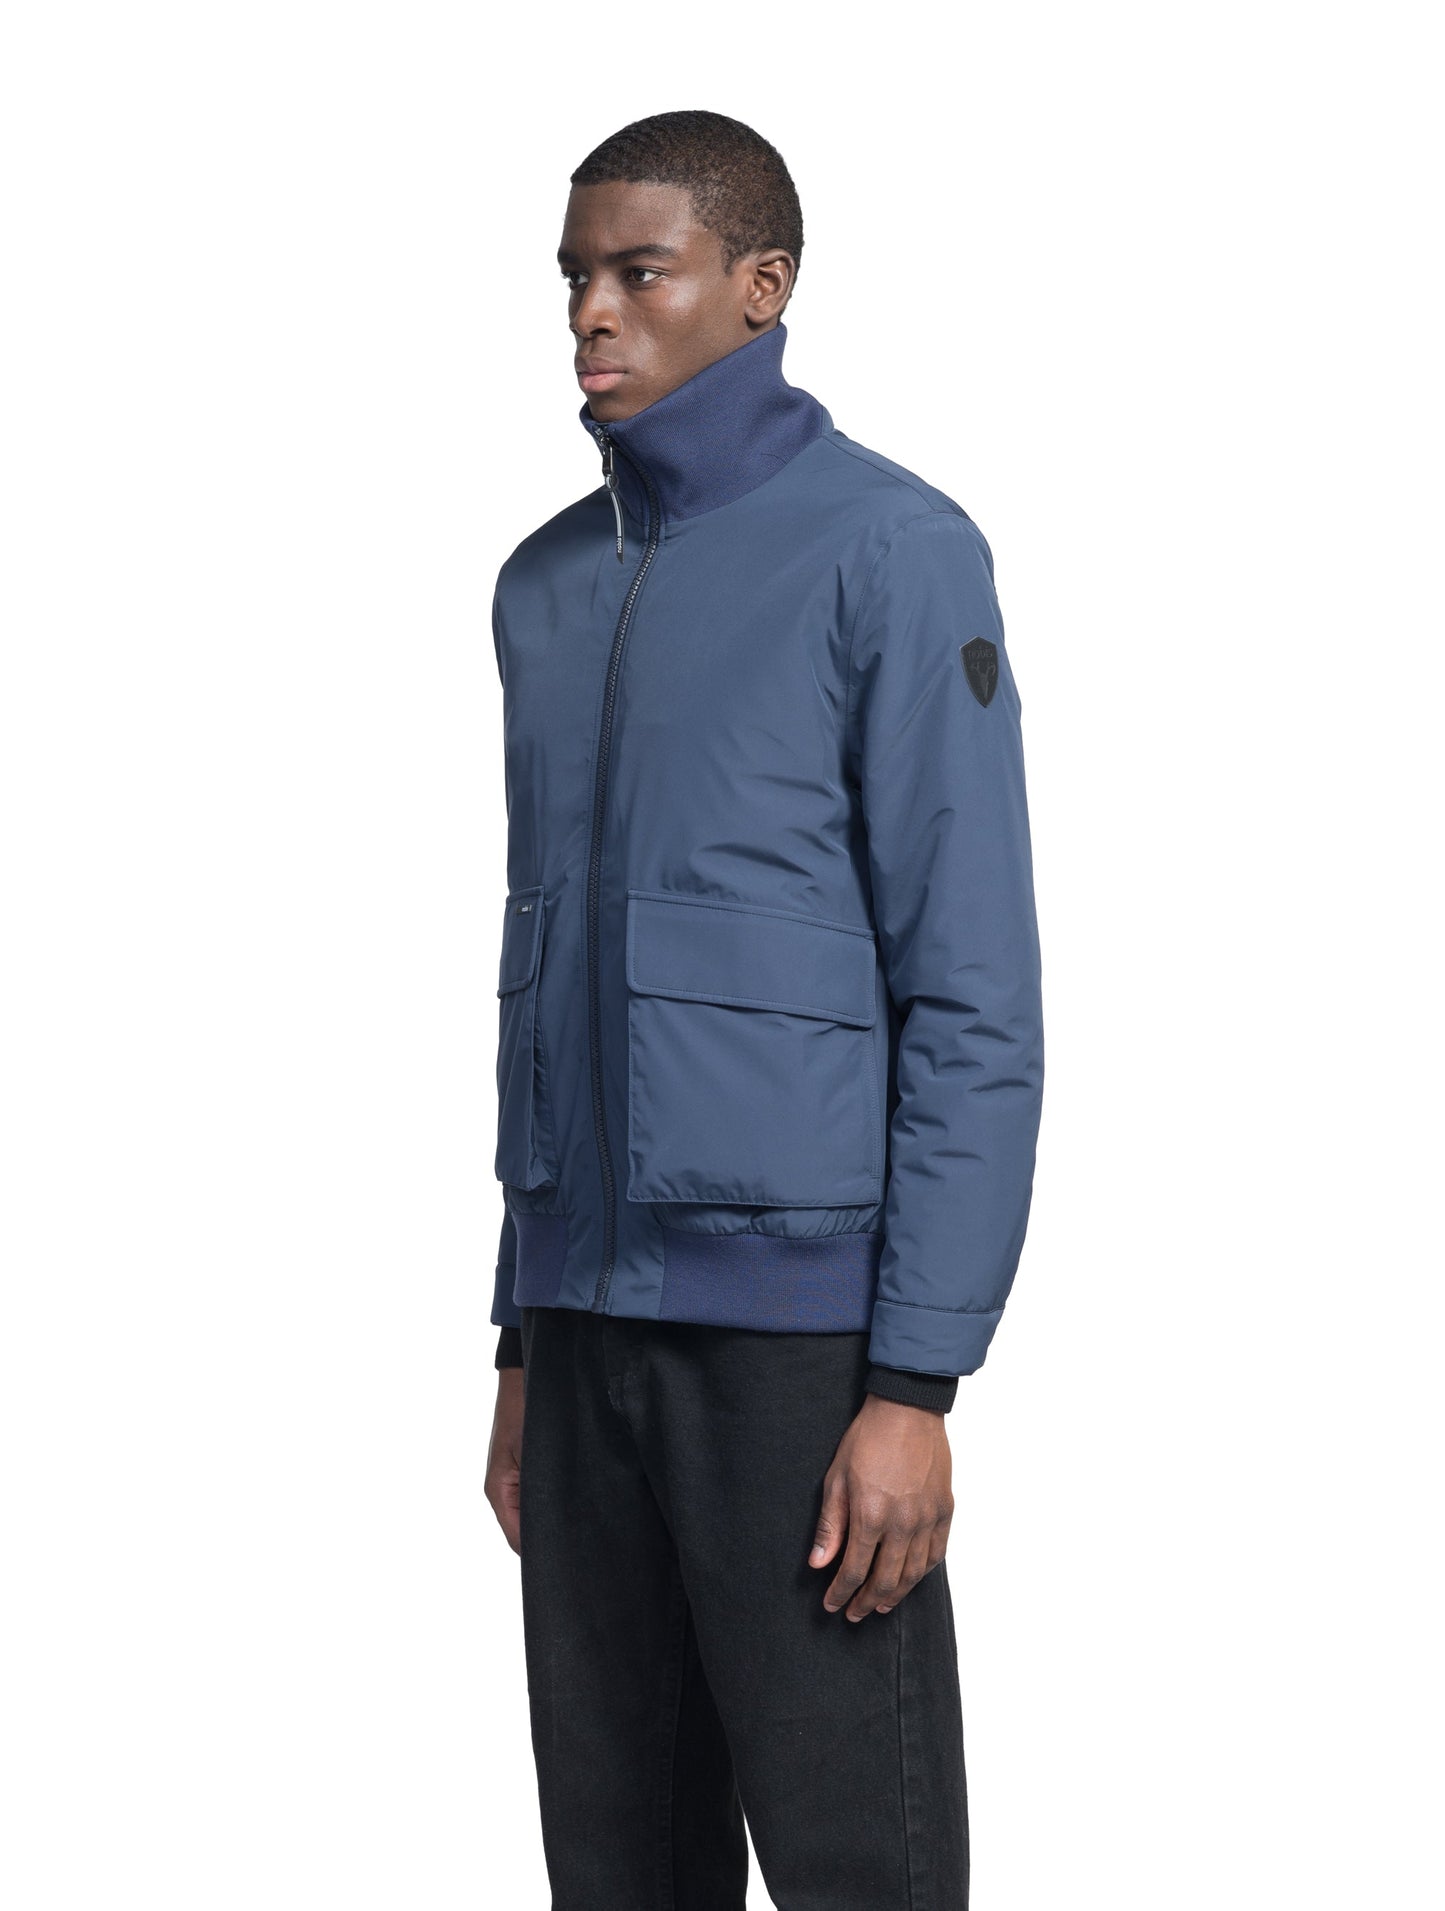 Flint Men's Tailored Rib Collar Jacket in hip length, premium 3-ply Micro Denier fabrication, premium 4-way stretch, water resistant Primaloft Gold Insulation Active +, flap pockets with magnetic closure at waist, side entry pockets at waist, ribbed sleeve cuffs, two-way branded zipper at centre front, box pleat detailing at centre back, large interior zipper pocket, and interior button pocket at left chest, in Marine